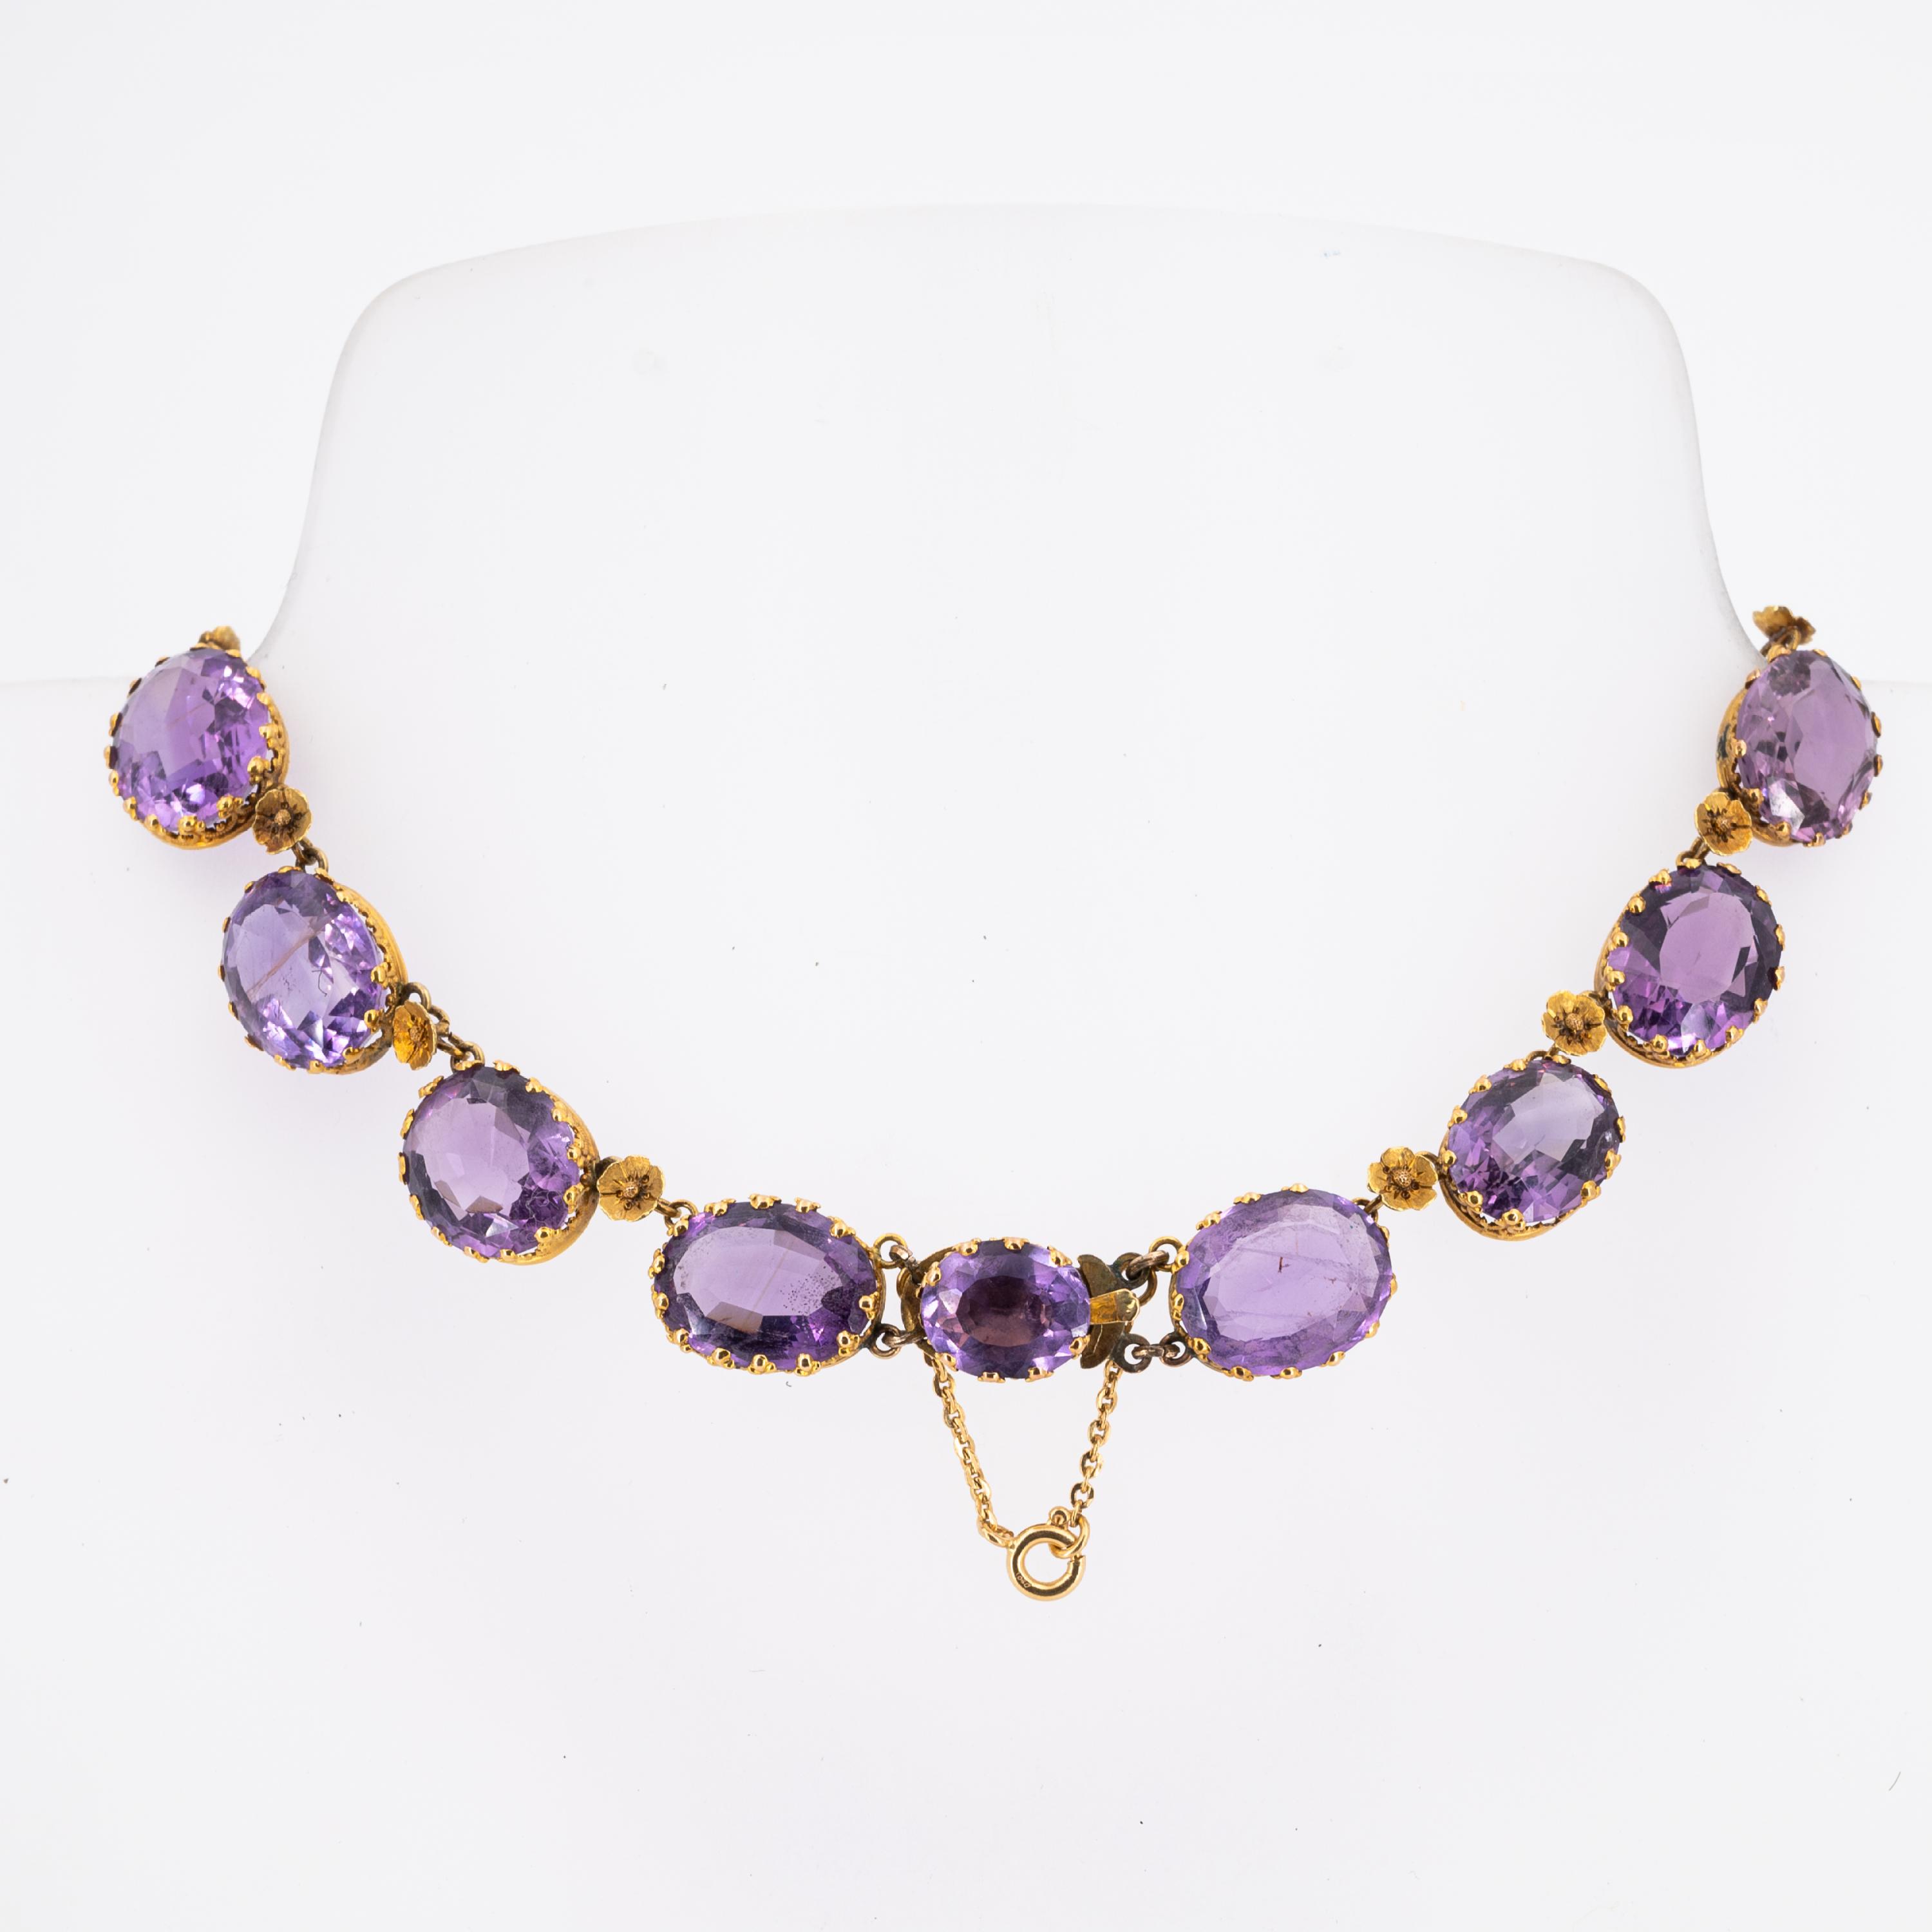 Historic Amethyst-Necklace - Image 3 of 4